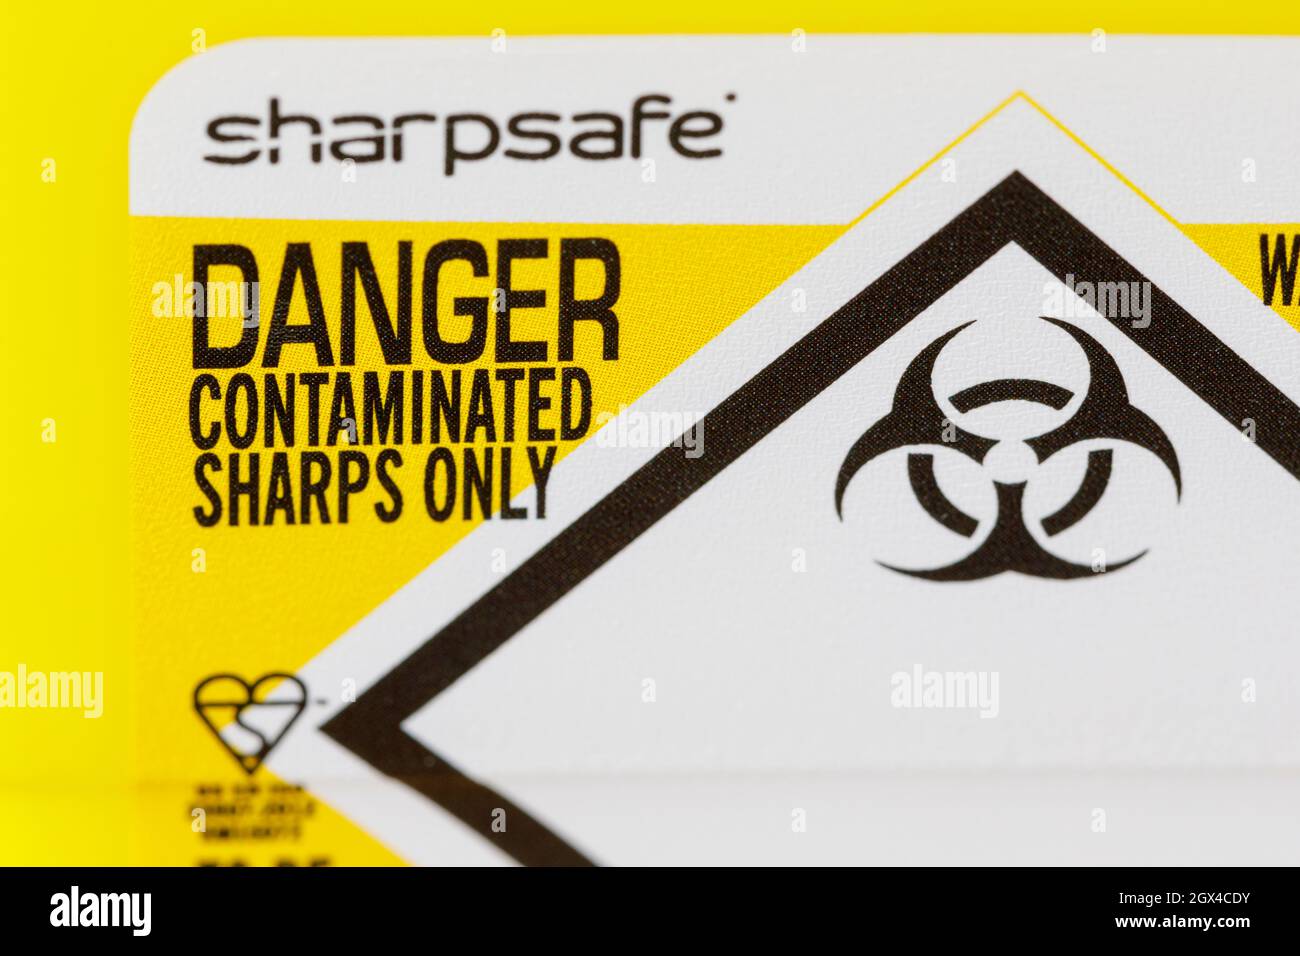 Sharpsafe or sharps box used for storing used syringes for disposal Stock Photo